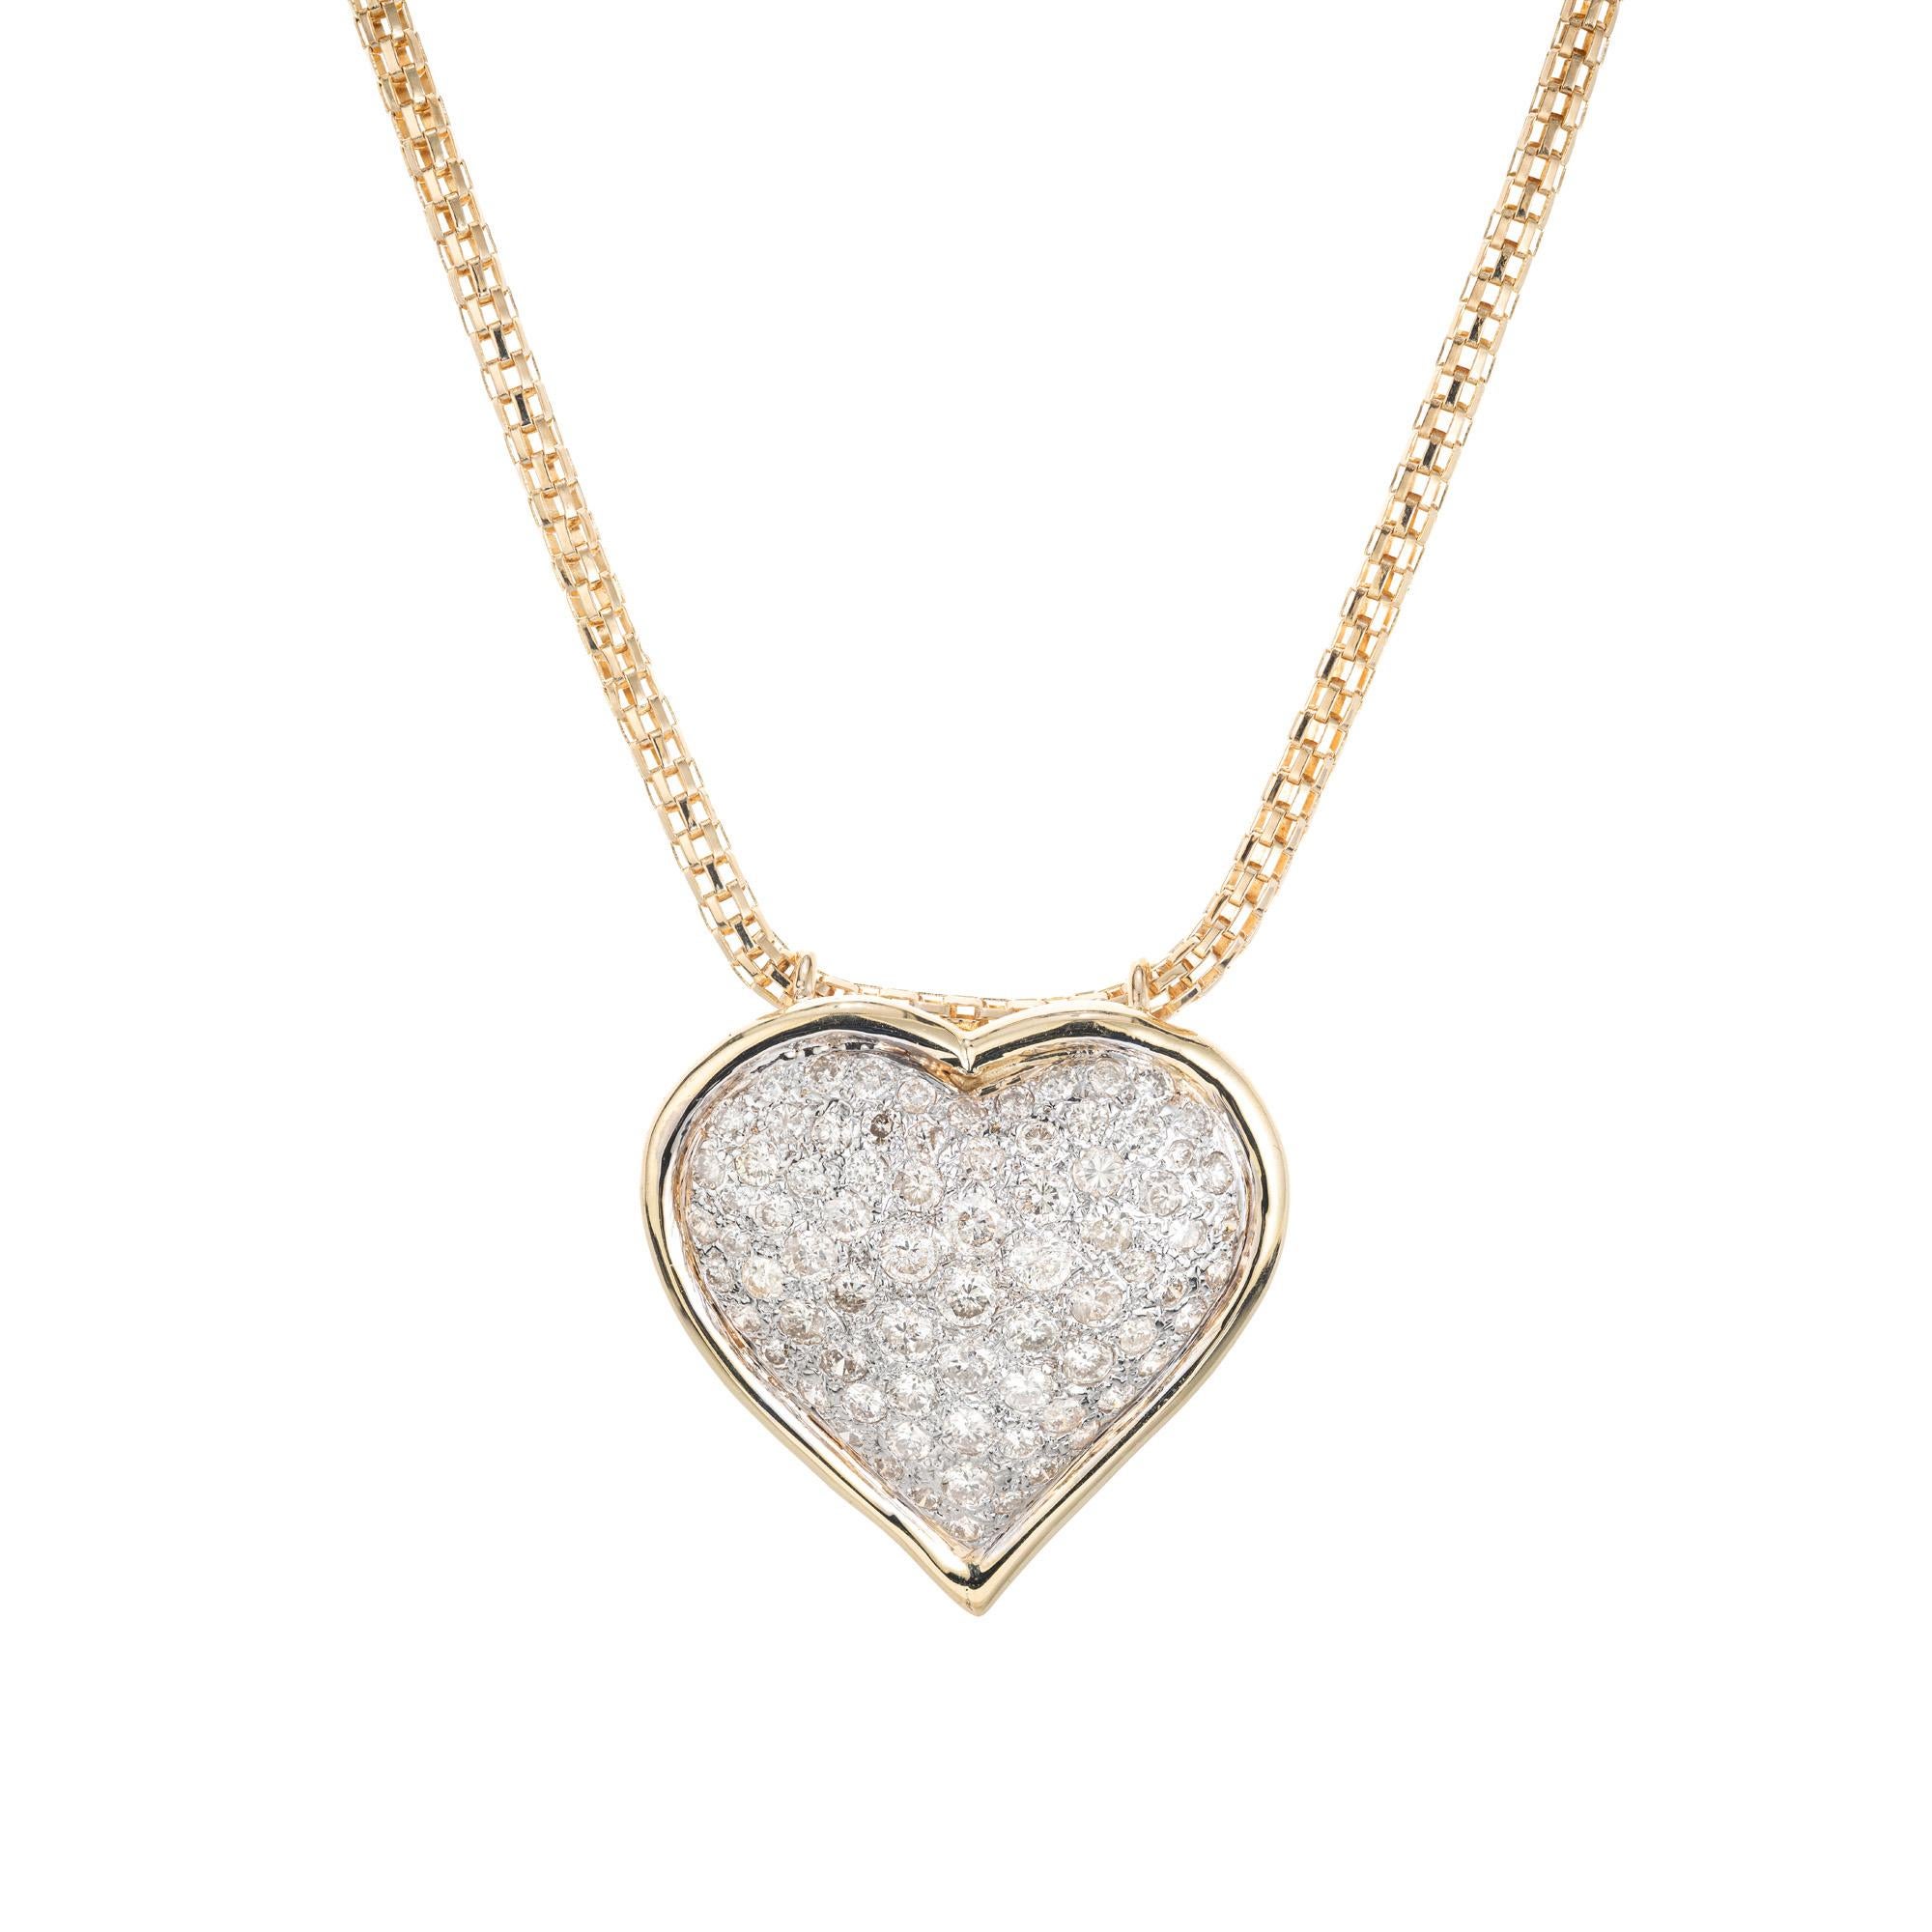 1960's heart shaped diamond pendant necklace. 73 round pave set diamonds totaling 1.00cts, set in 14k white gold with a heart shaped 14k yellow gold frame, attached to an 18 inch yellow gold chain. Substantial in size and elegance. 

73 round